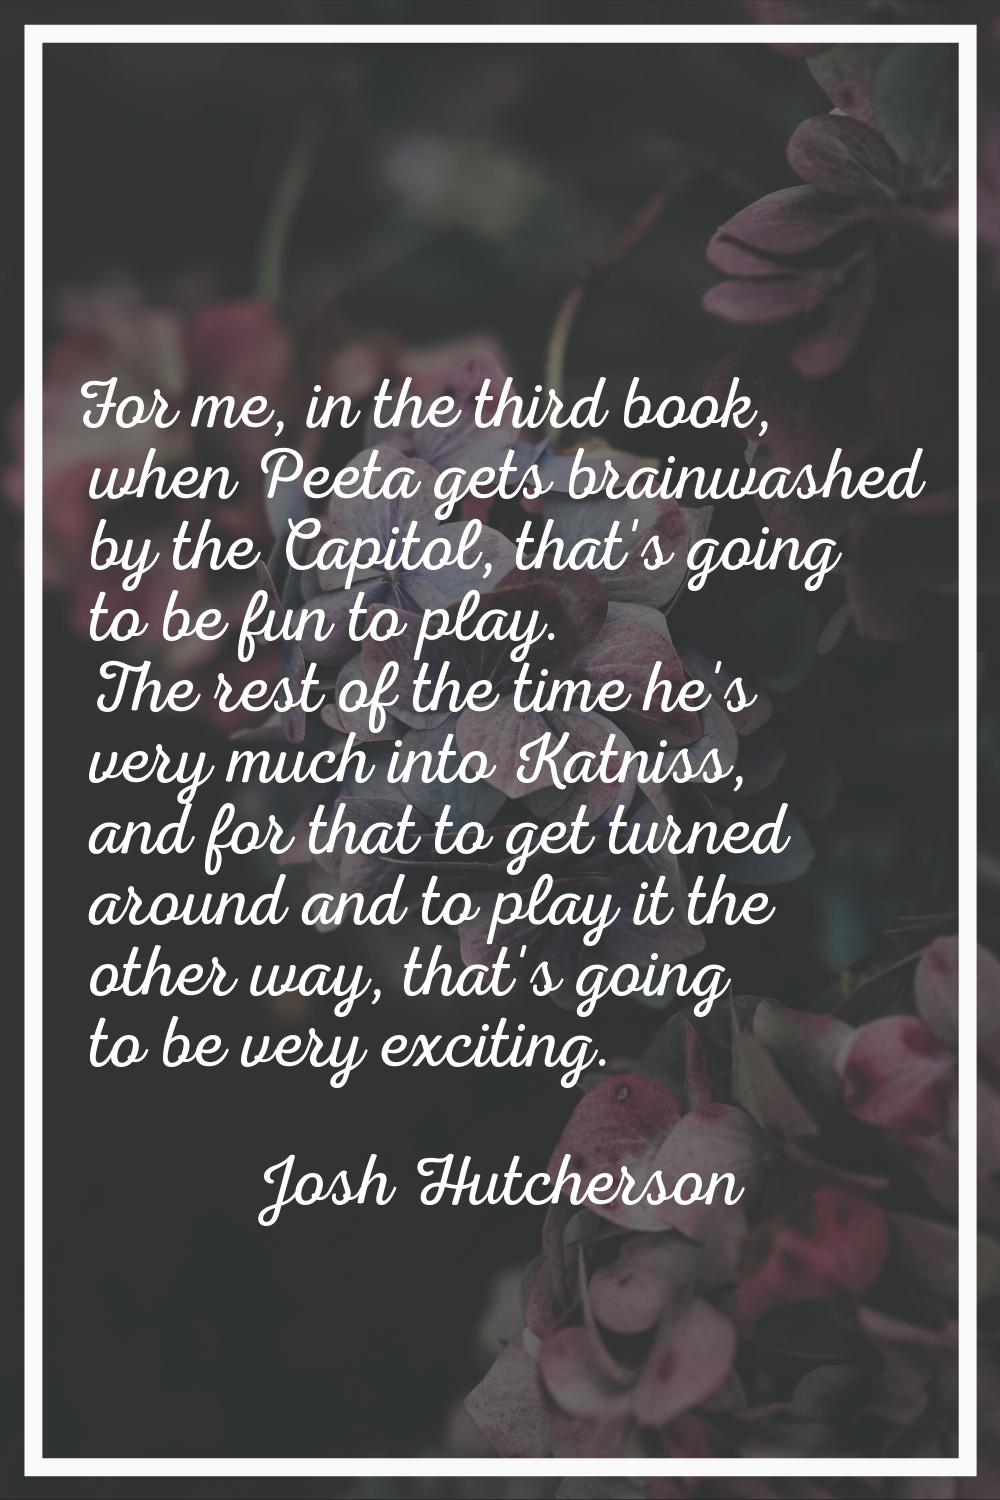 For me, in the third book, when Peeta gets brainwashed by the Capitol, that's going to be fun to pl